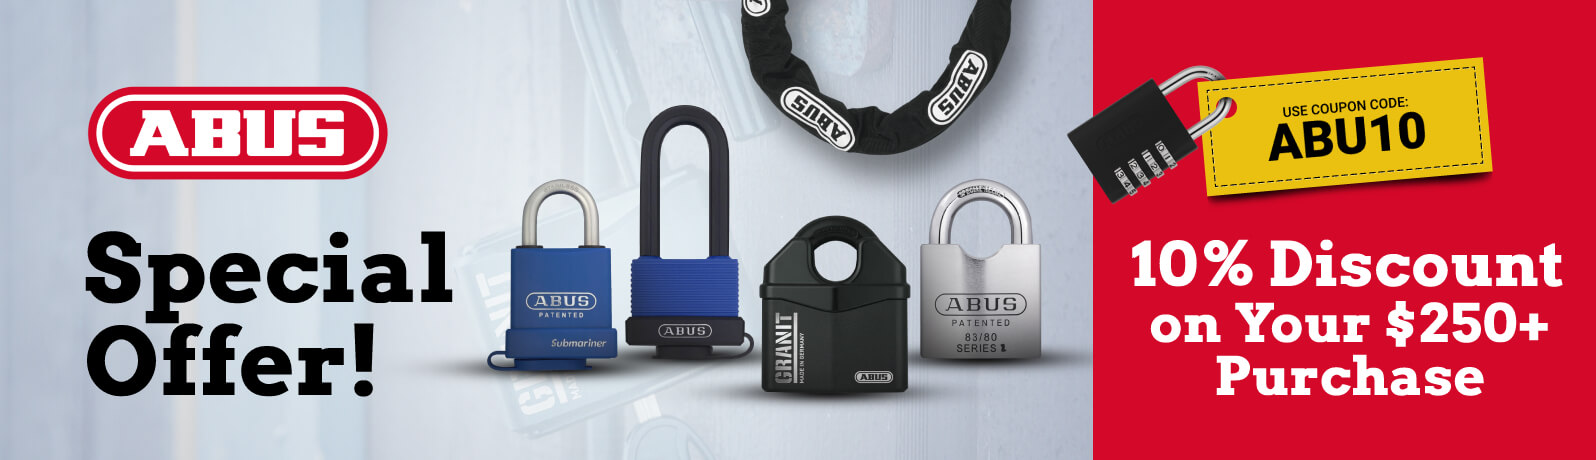 ABUS Special Offer!